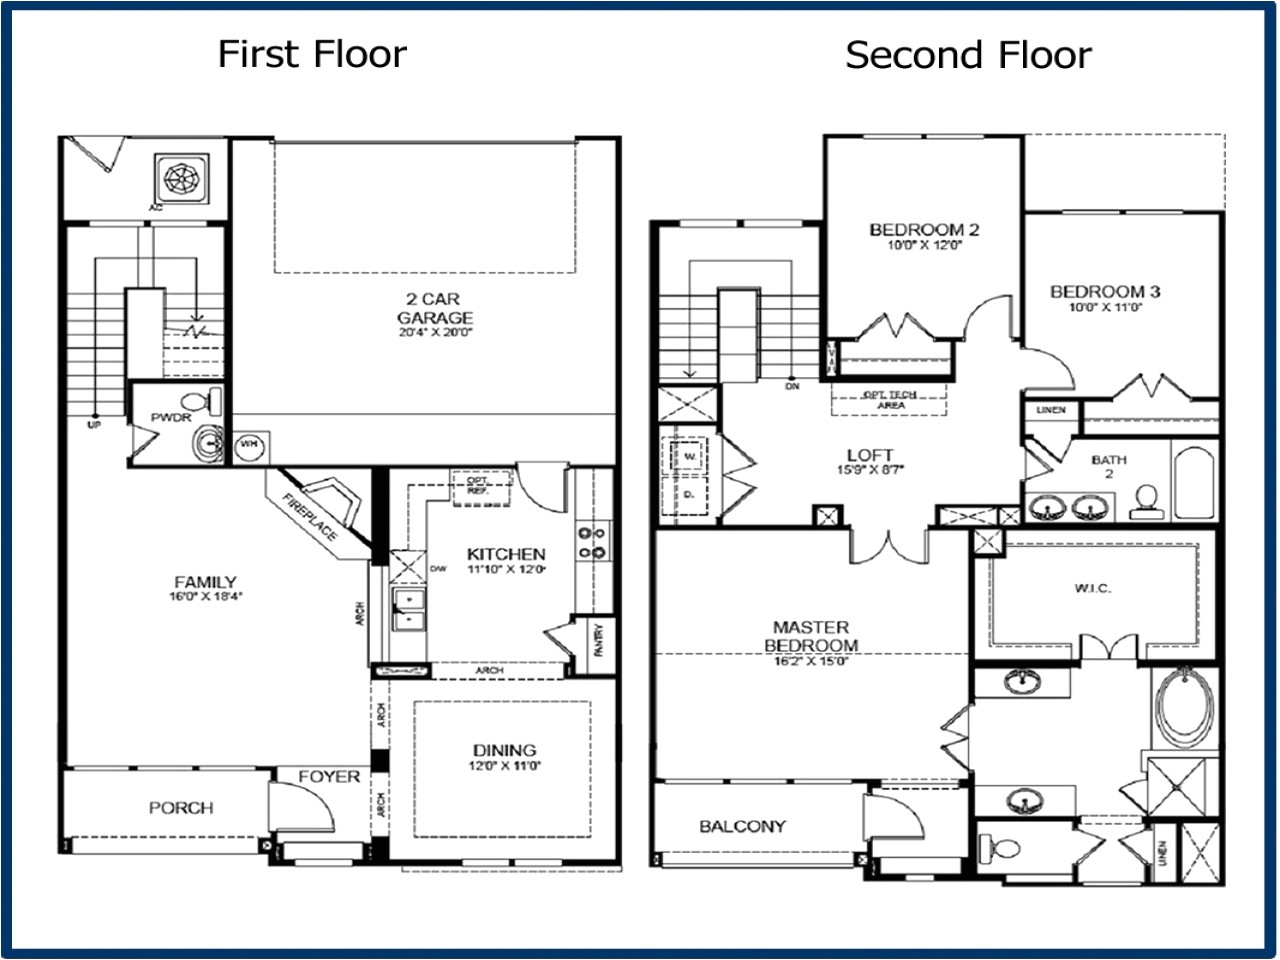 2 Bedroom Home Plans with Loft 1 Story House Plans with Loft New 2 Story Master Bedroom 2